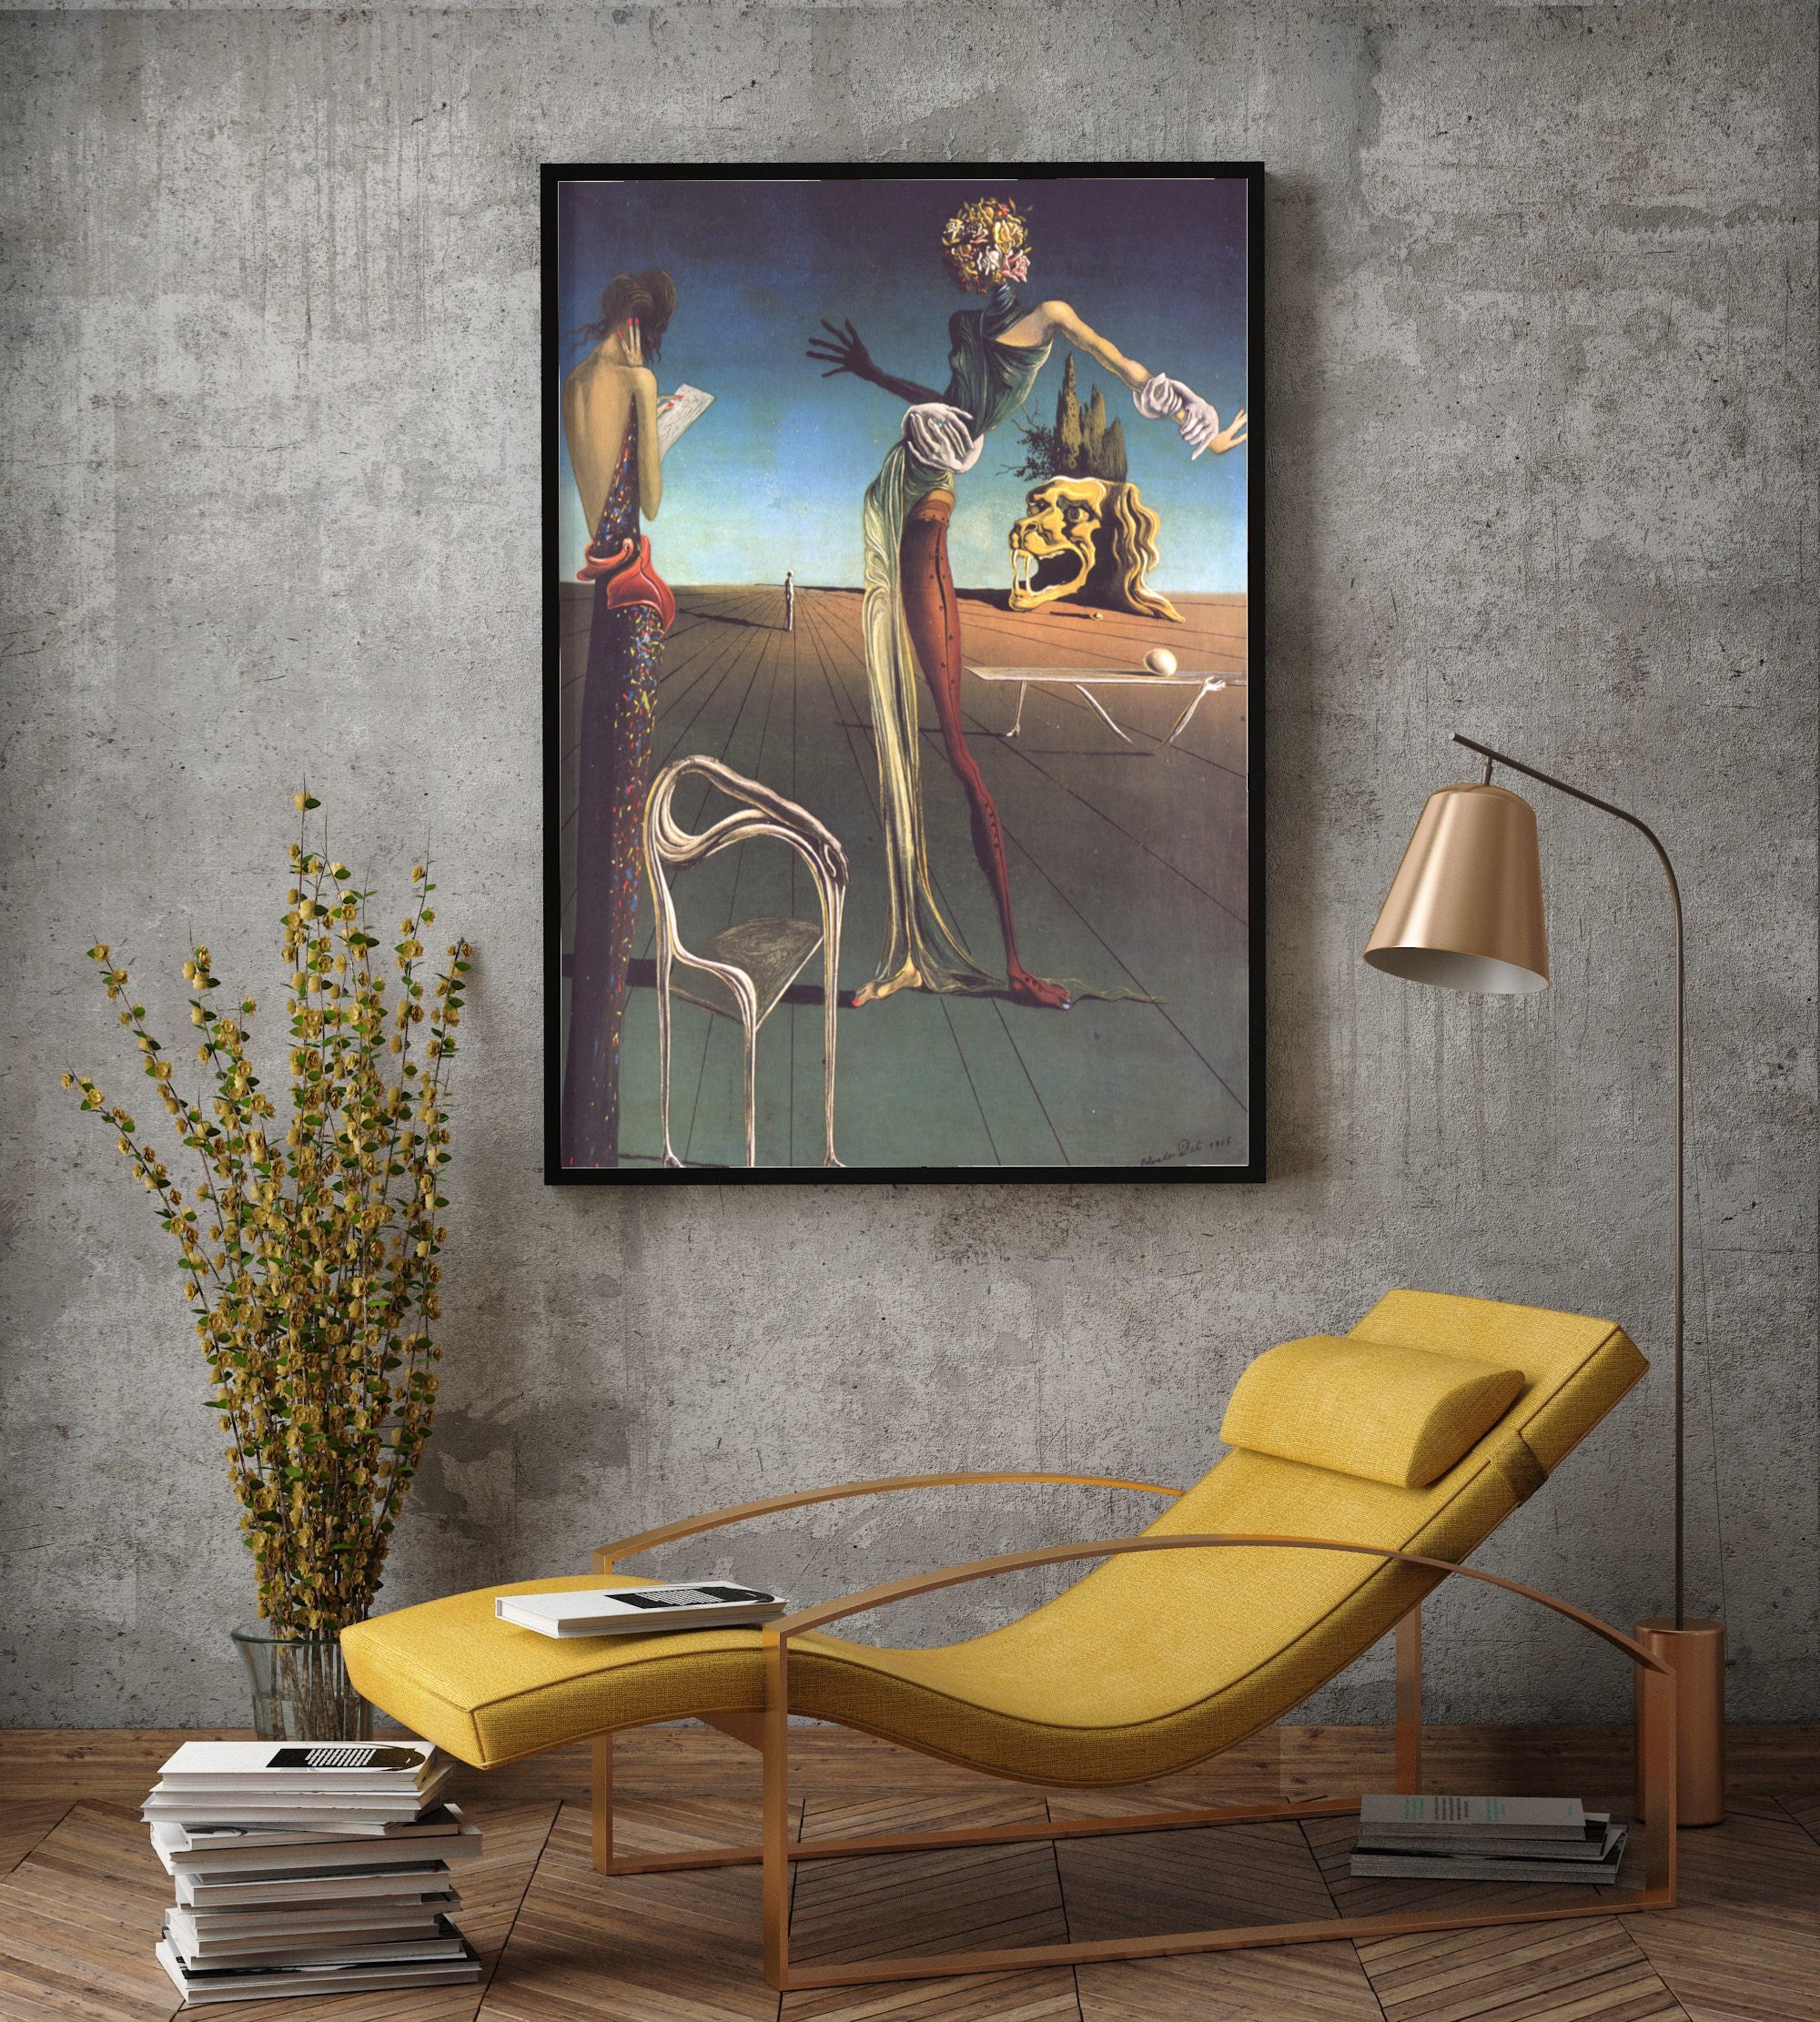 Abstract print in modern home